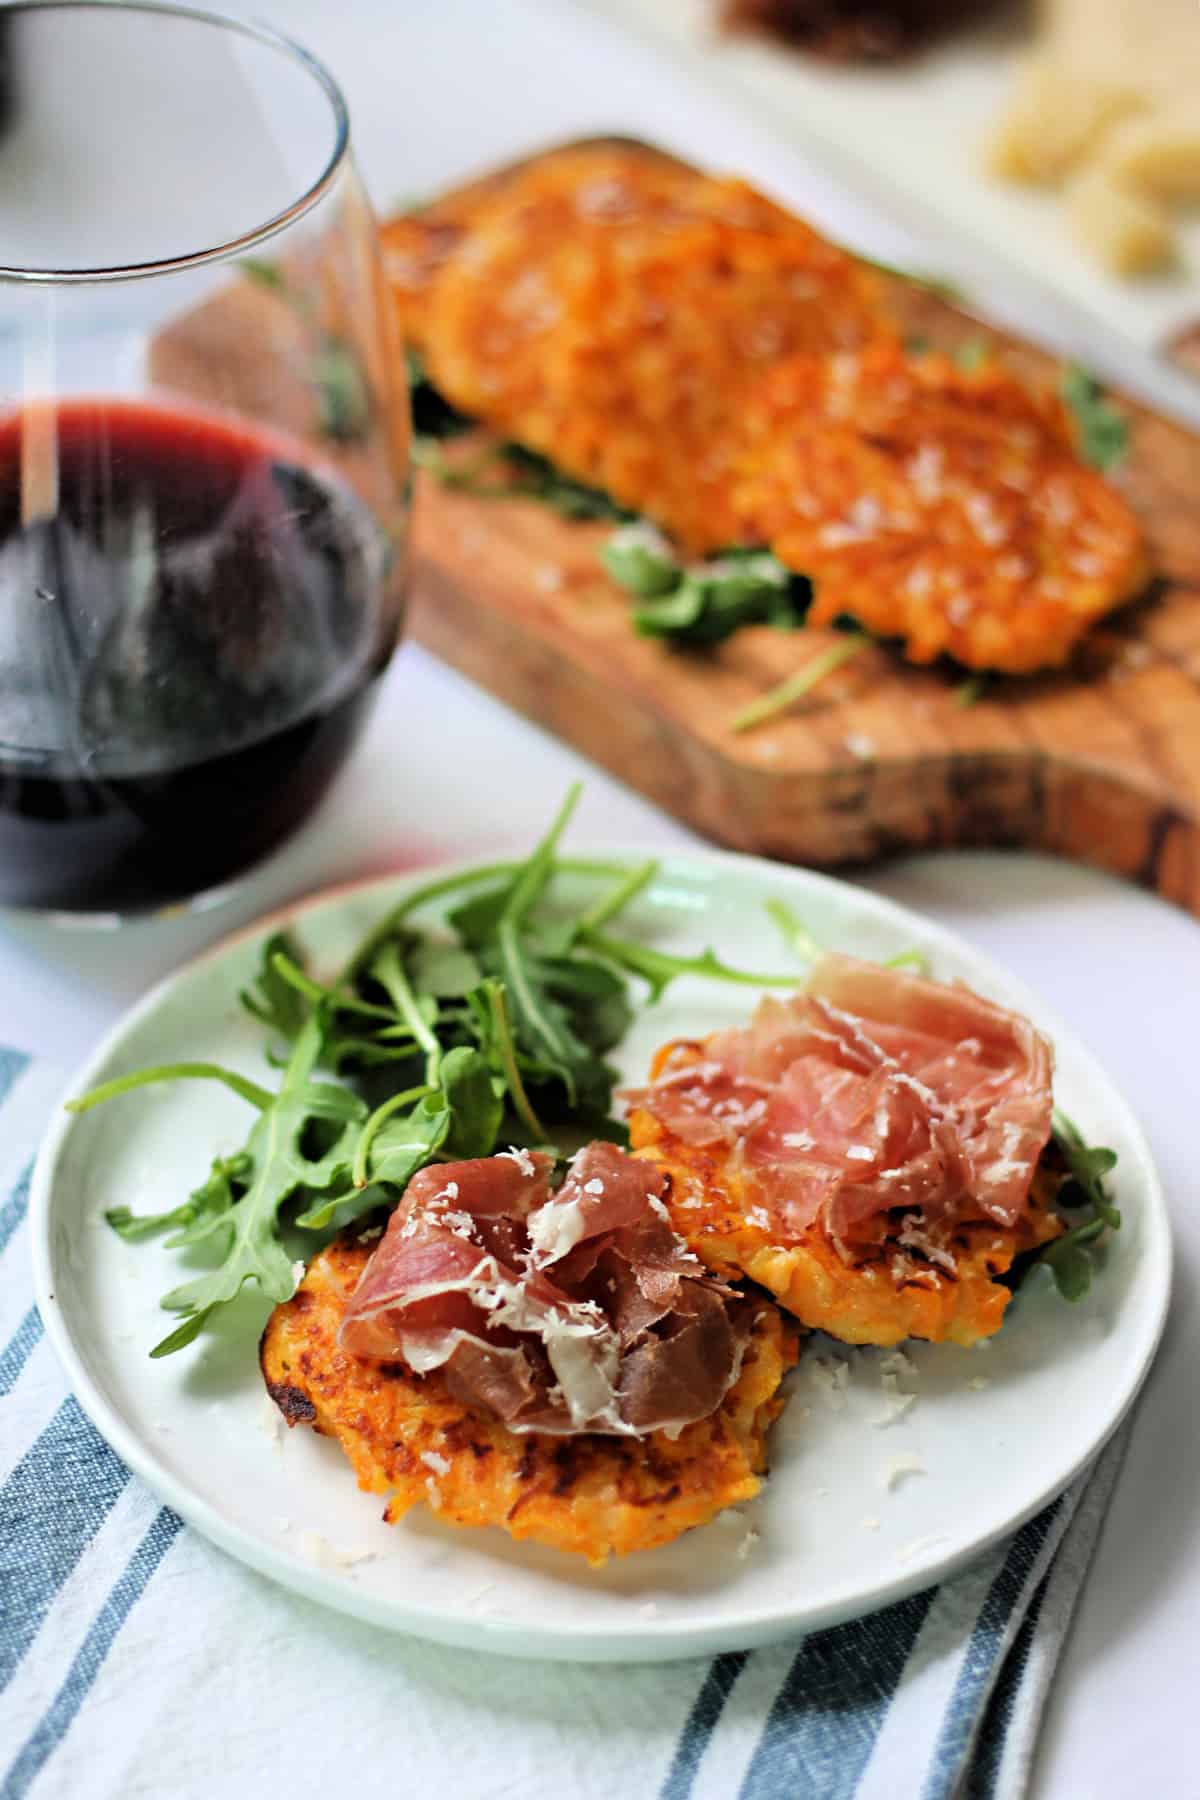 Butternut squash fritters topped with proscuitto on an appetizer plate.